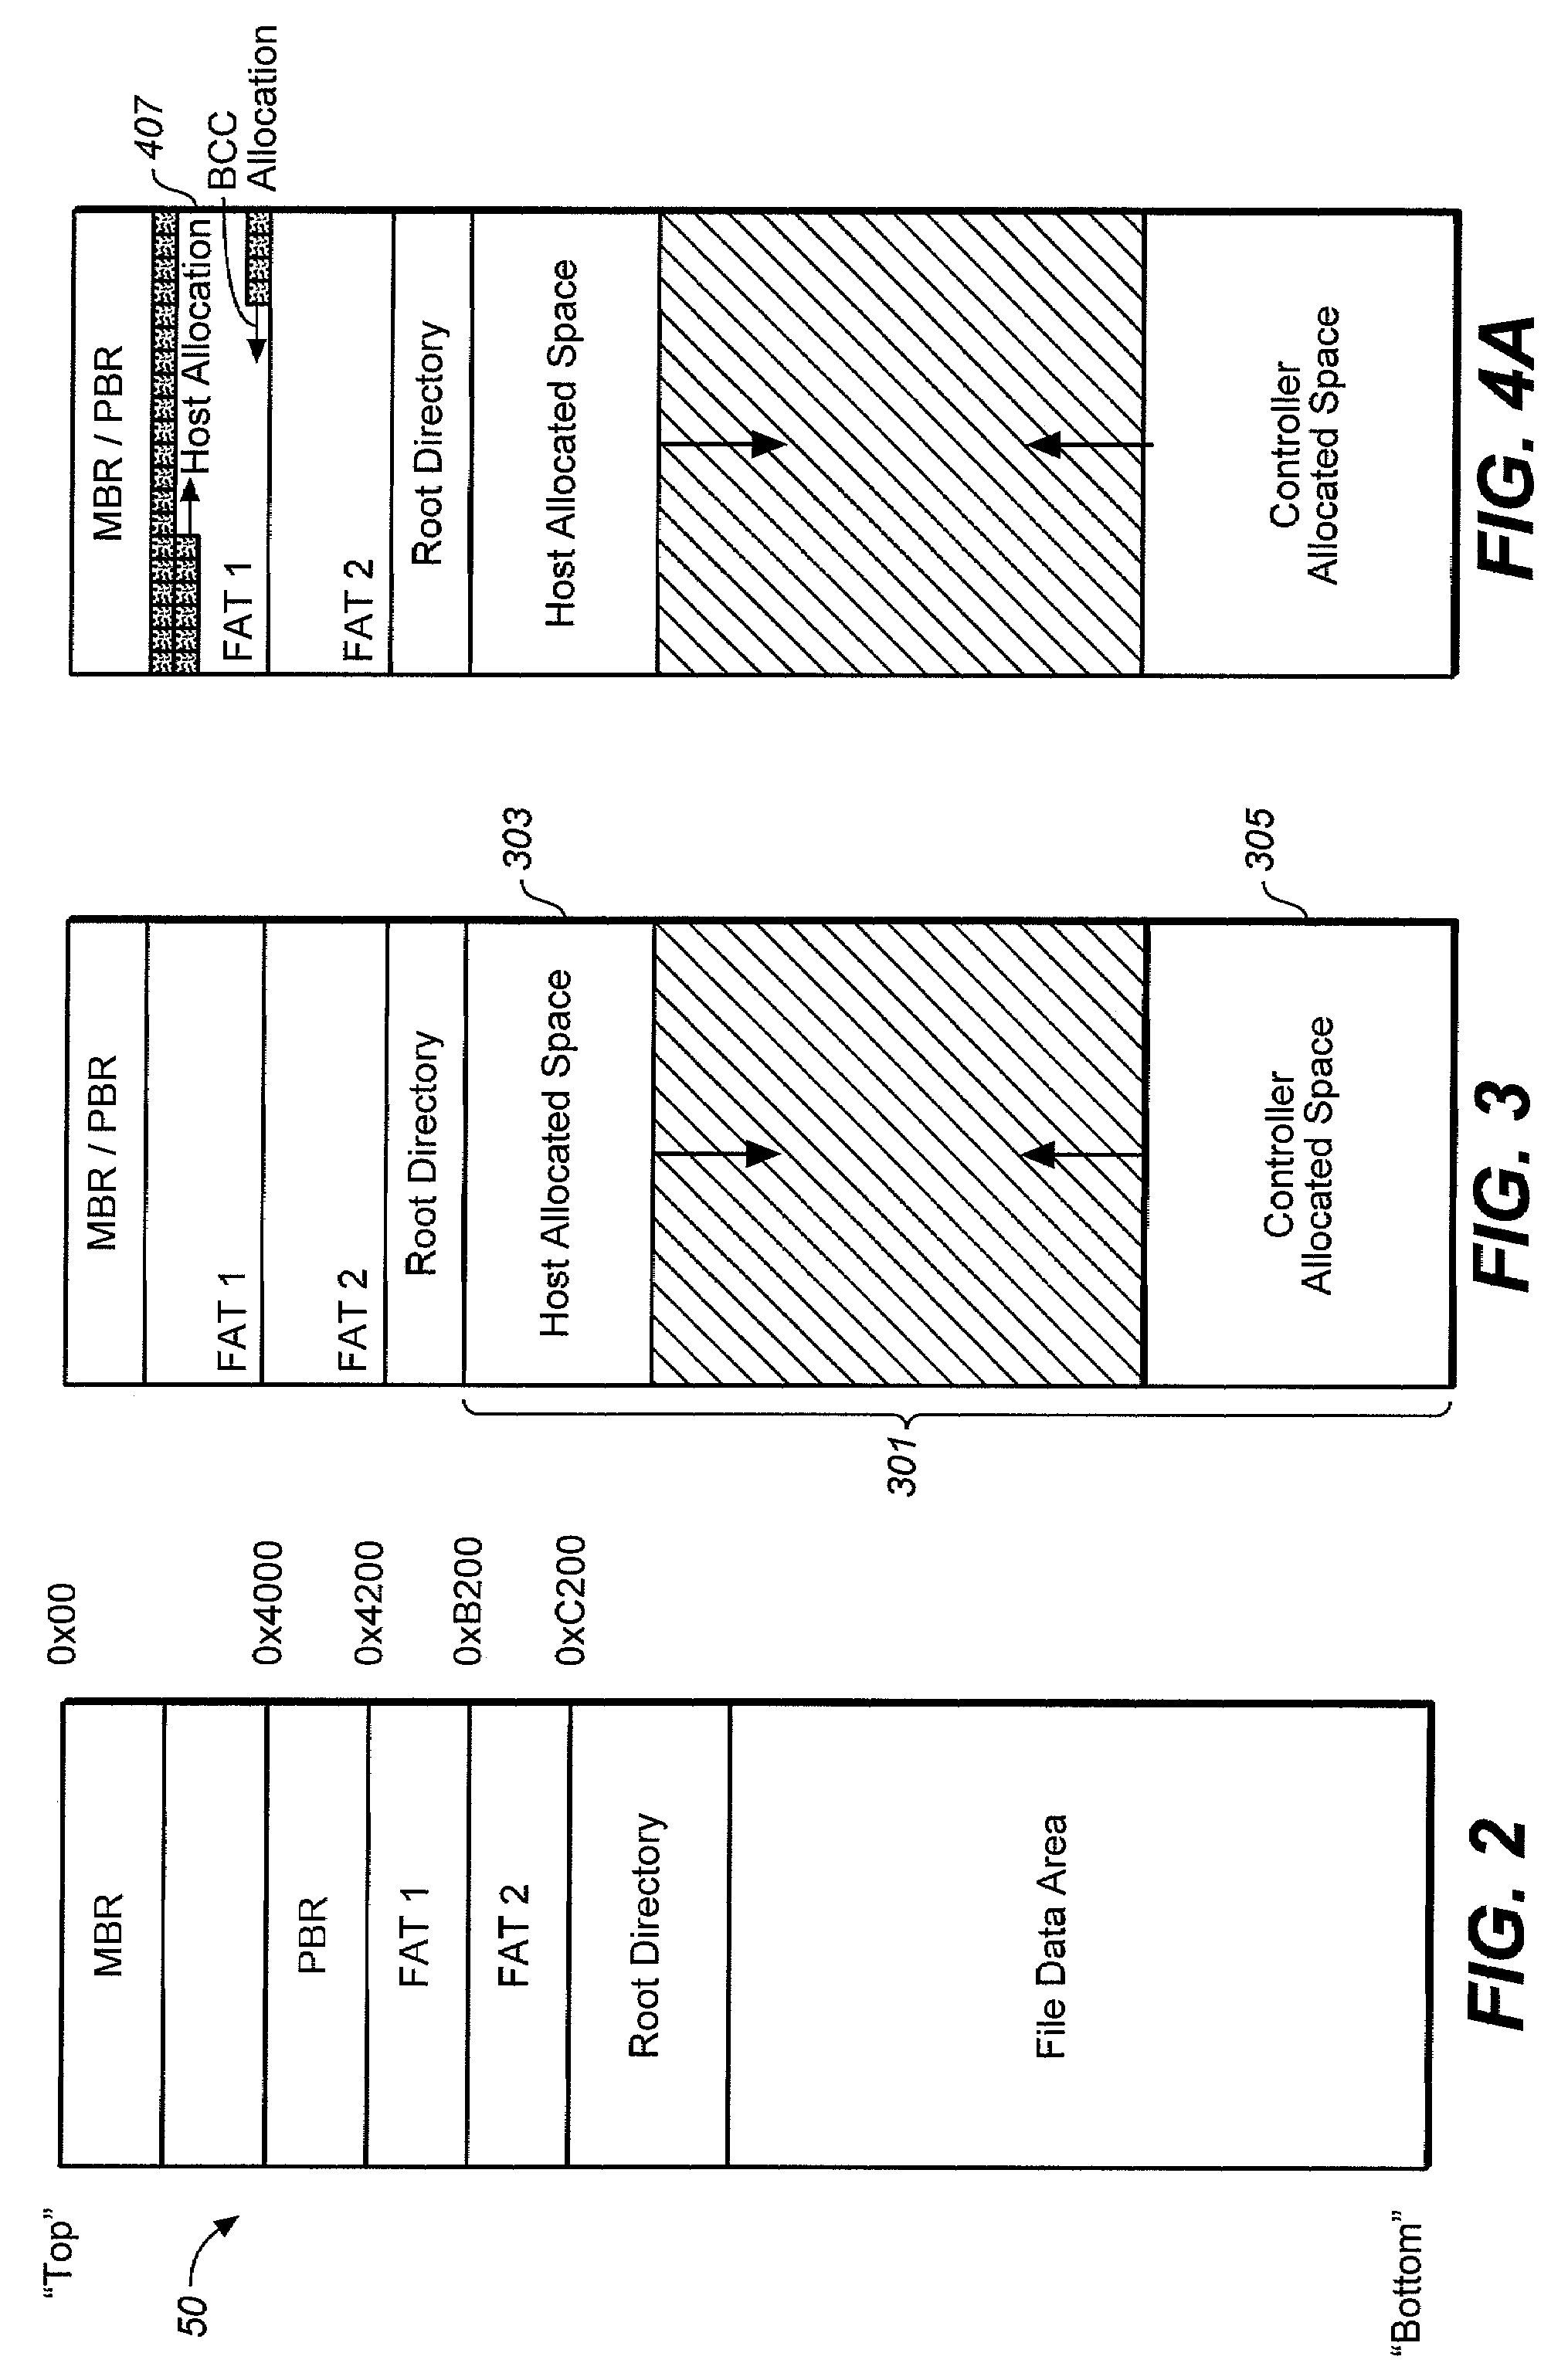 Systems for Managing File Allocation Table Information